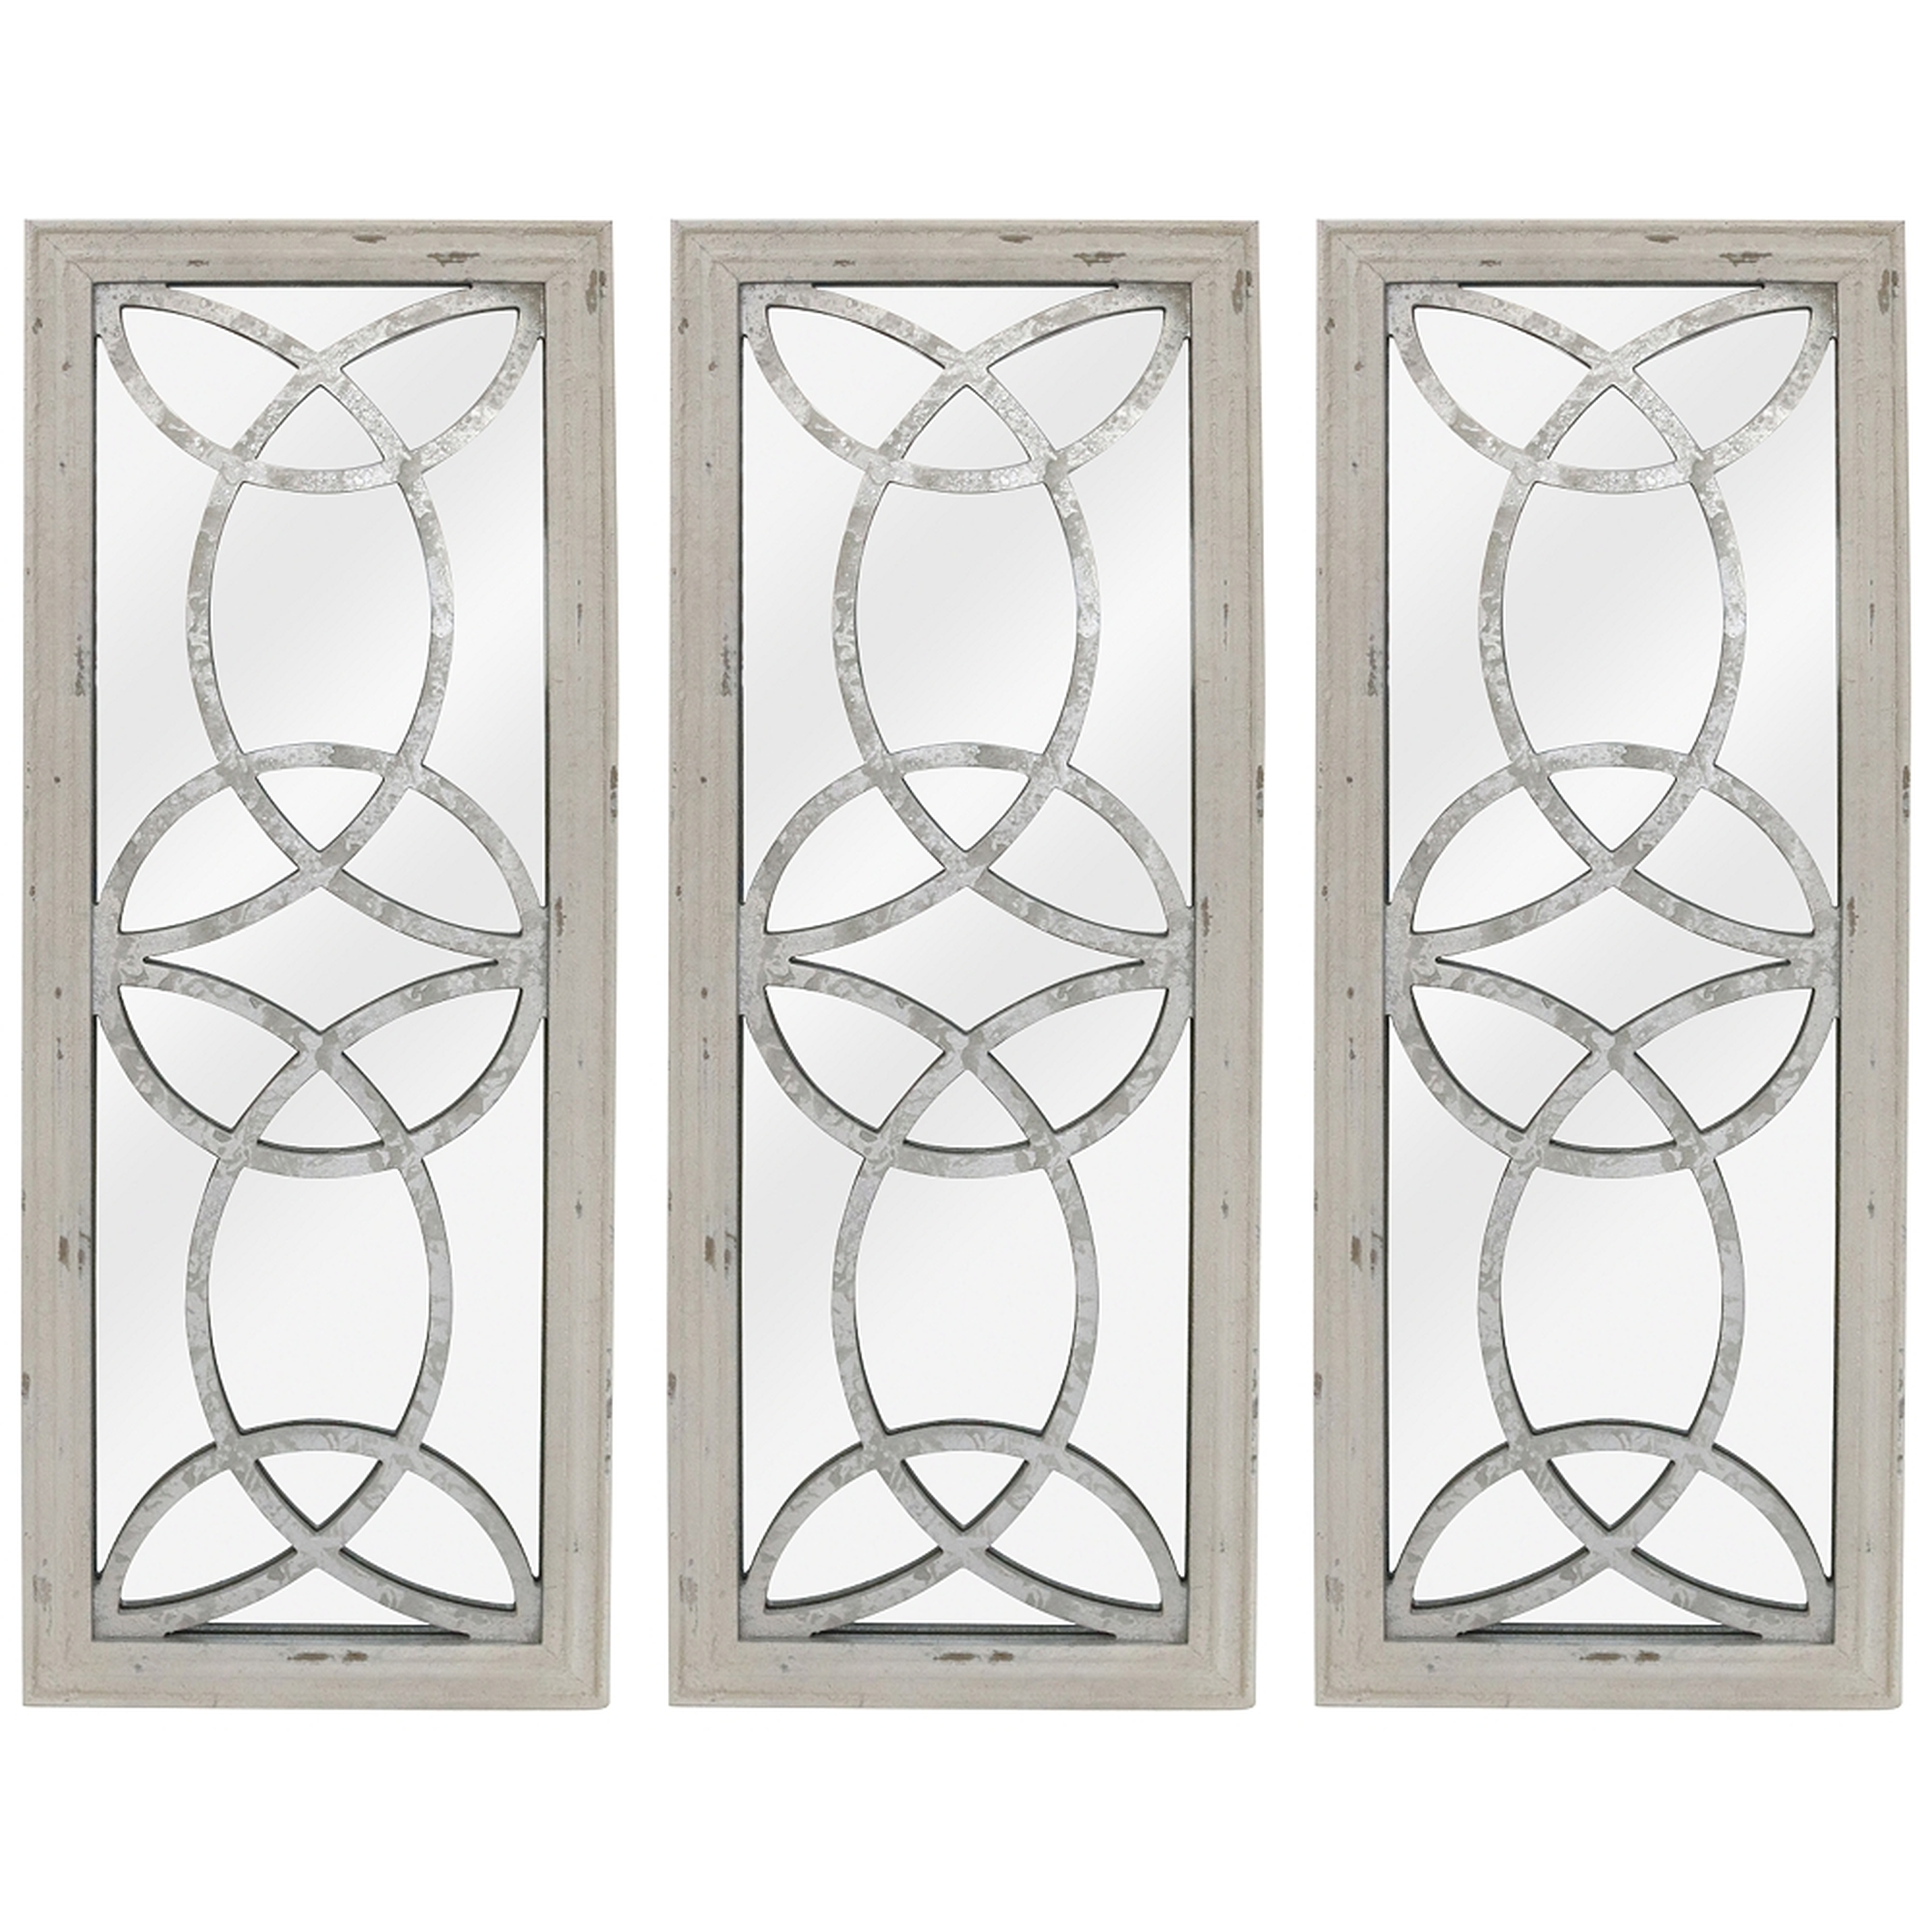 Depiction White 11 3/4" x 31 1/2" Wall Mirrors Set of 3 - Style # 79V58 - Lamps Plus